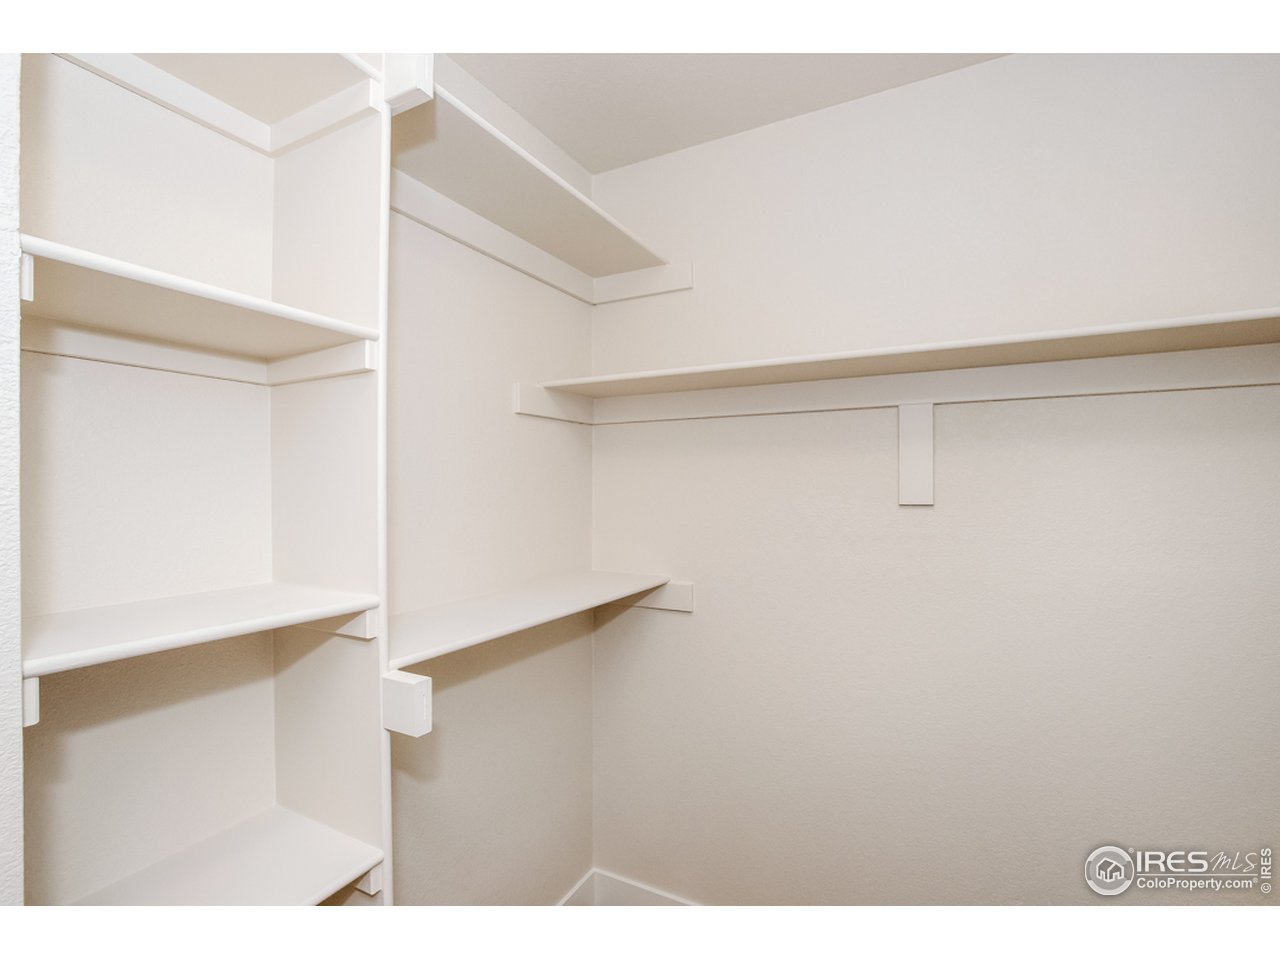 All new shelving in the closets